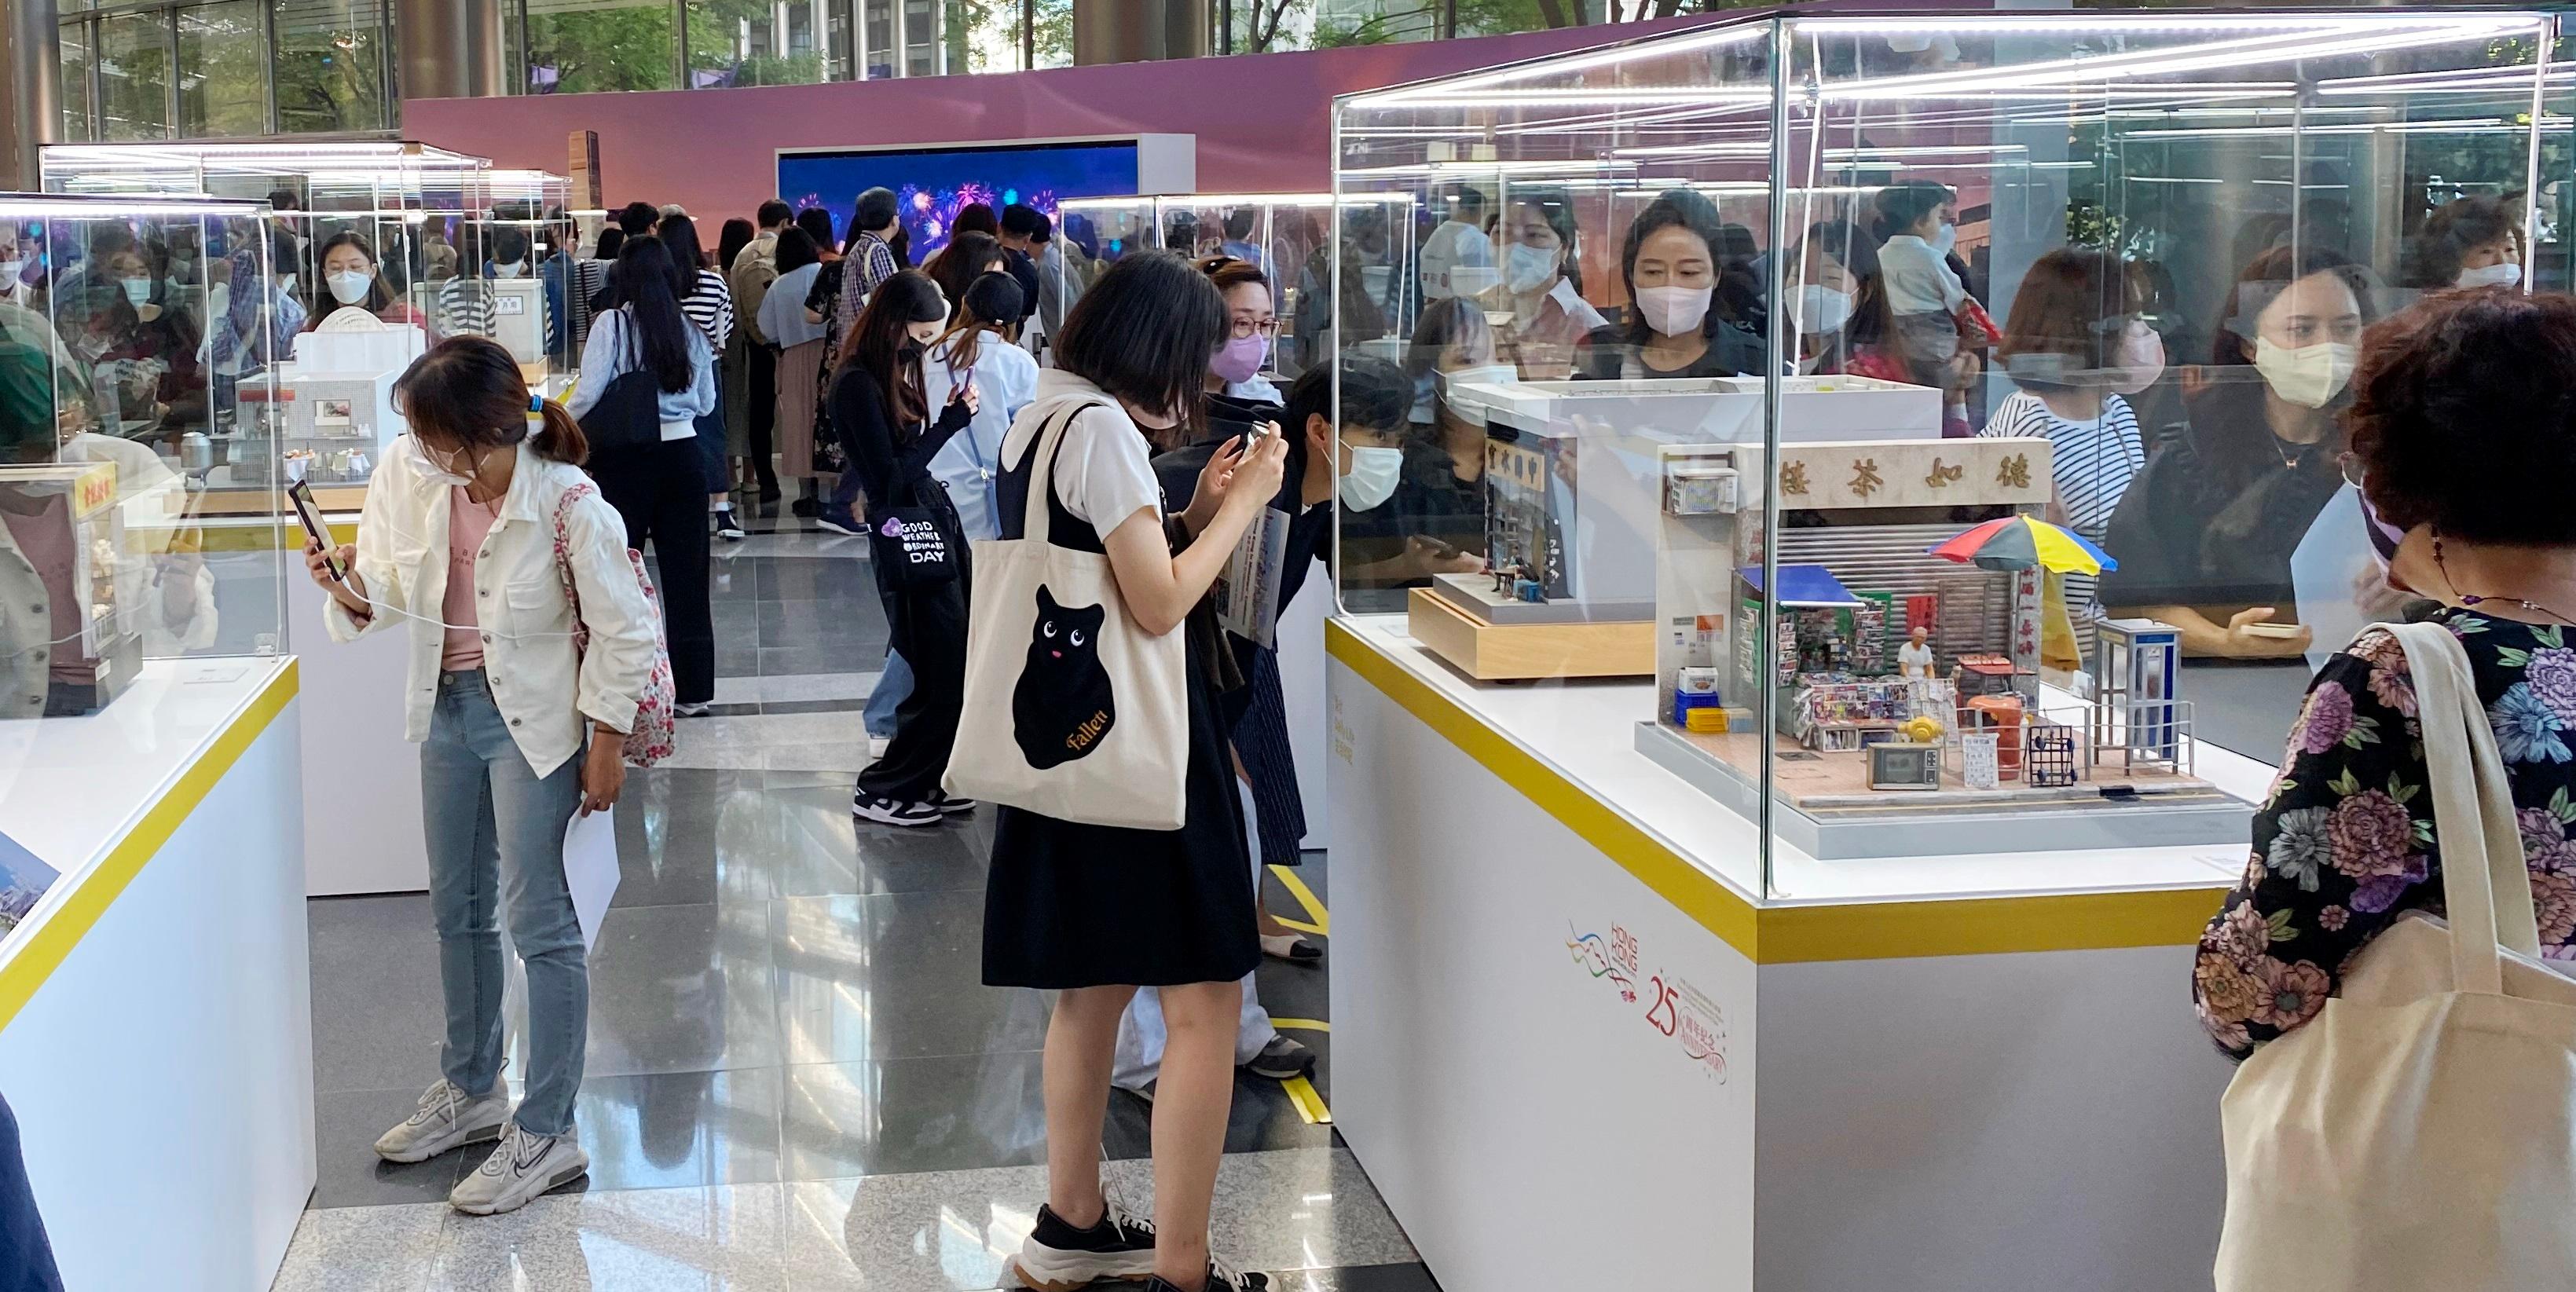 The "Hong Kong in Miniature" Exhibition @Seoul 2022, which showcases 40 miniature models that capture the uniqueness and vibrancy of Hong Kong, opened in Seoul, Korea, today (September 24).